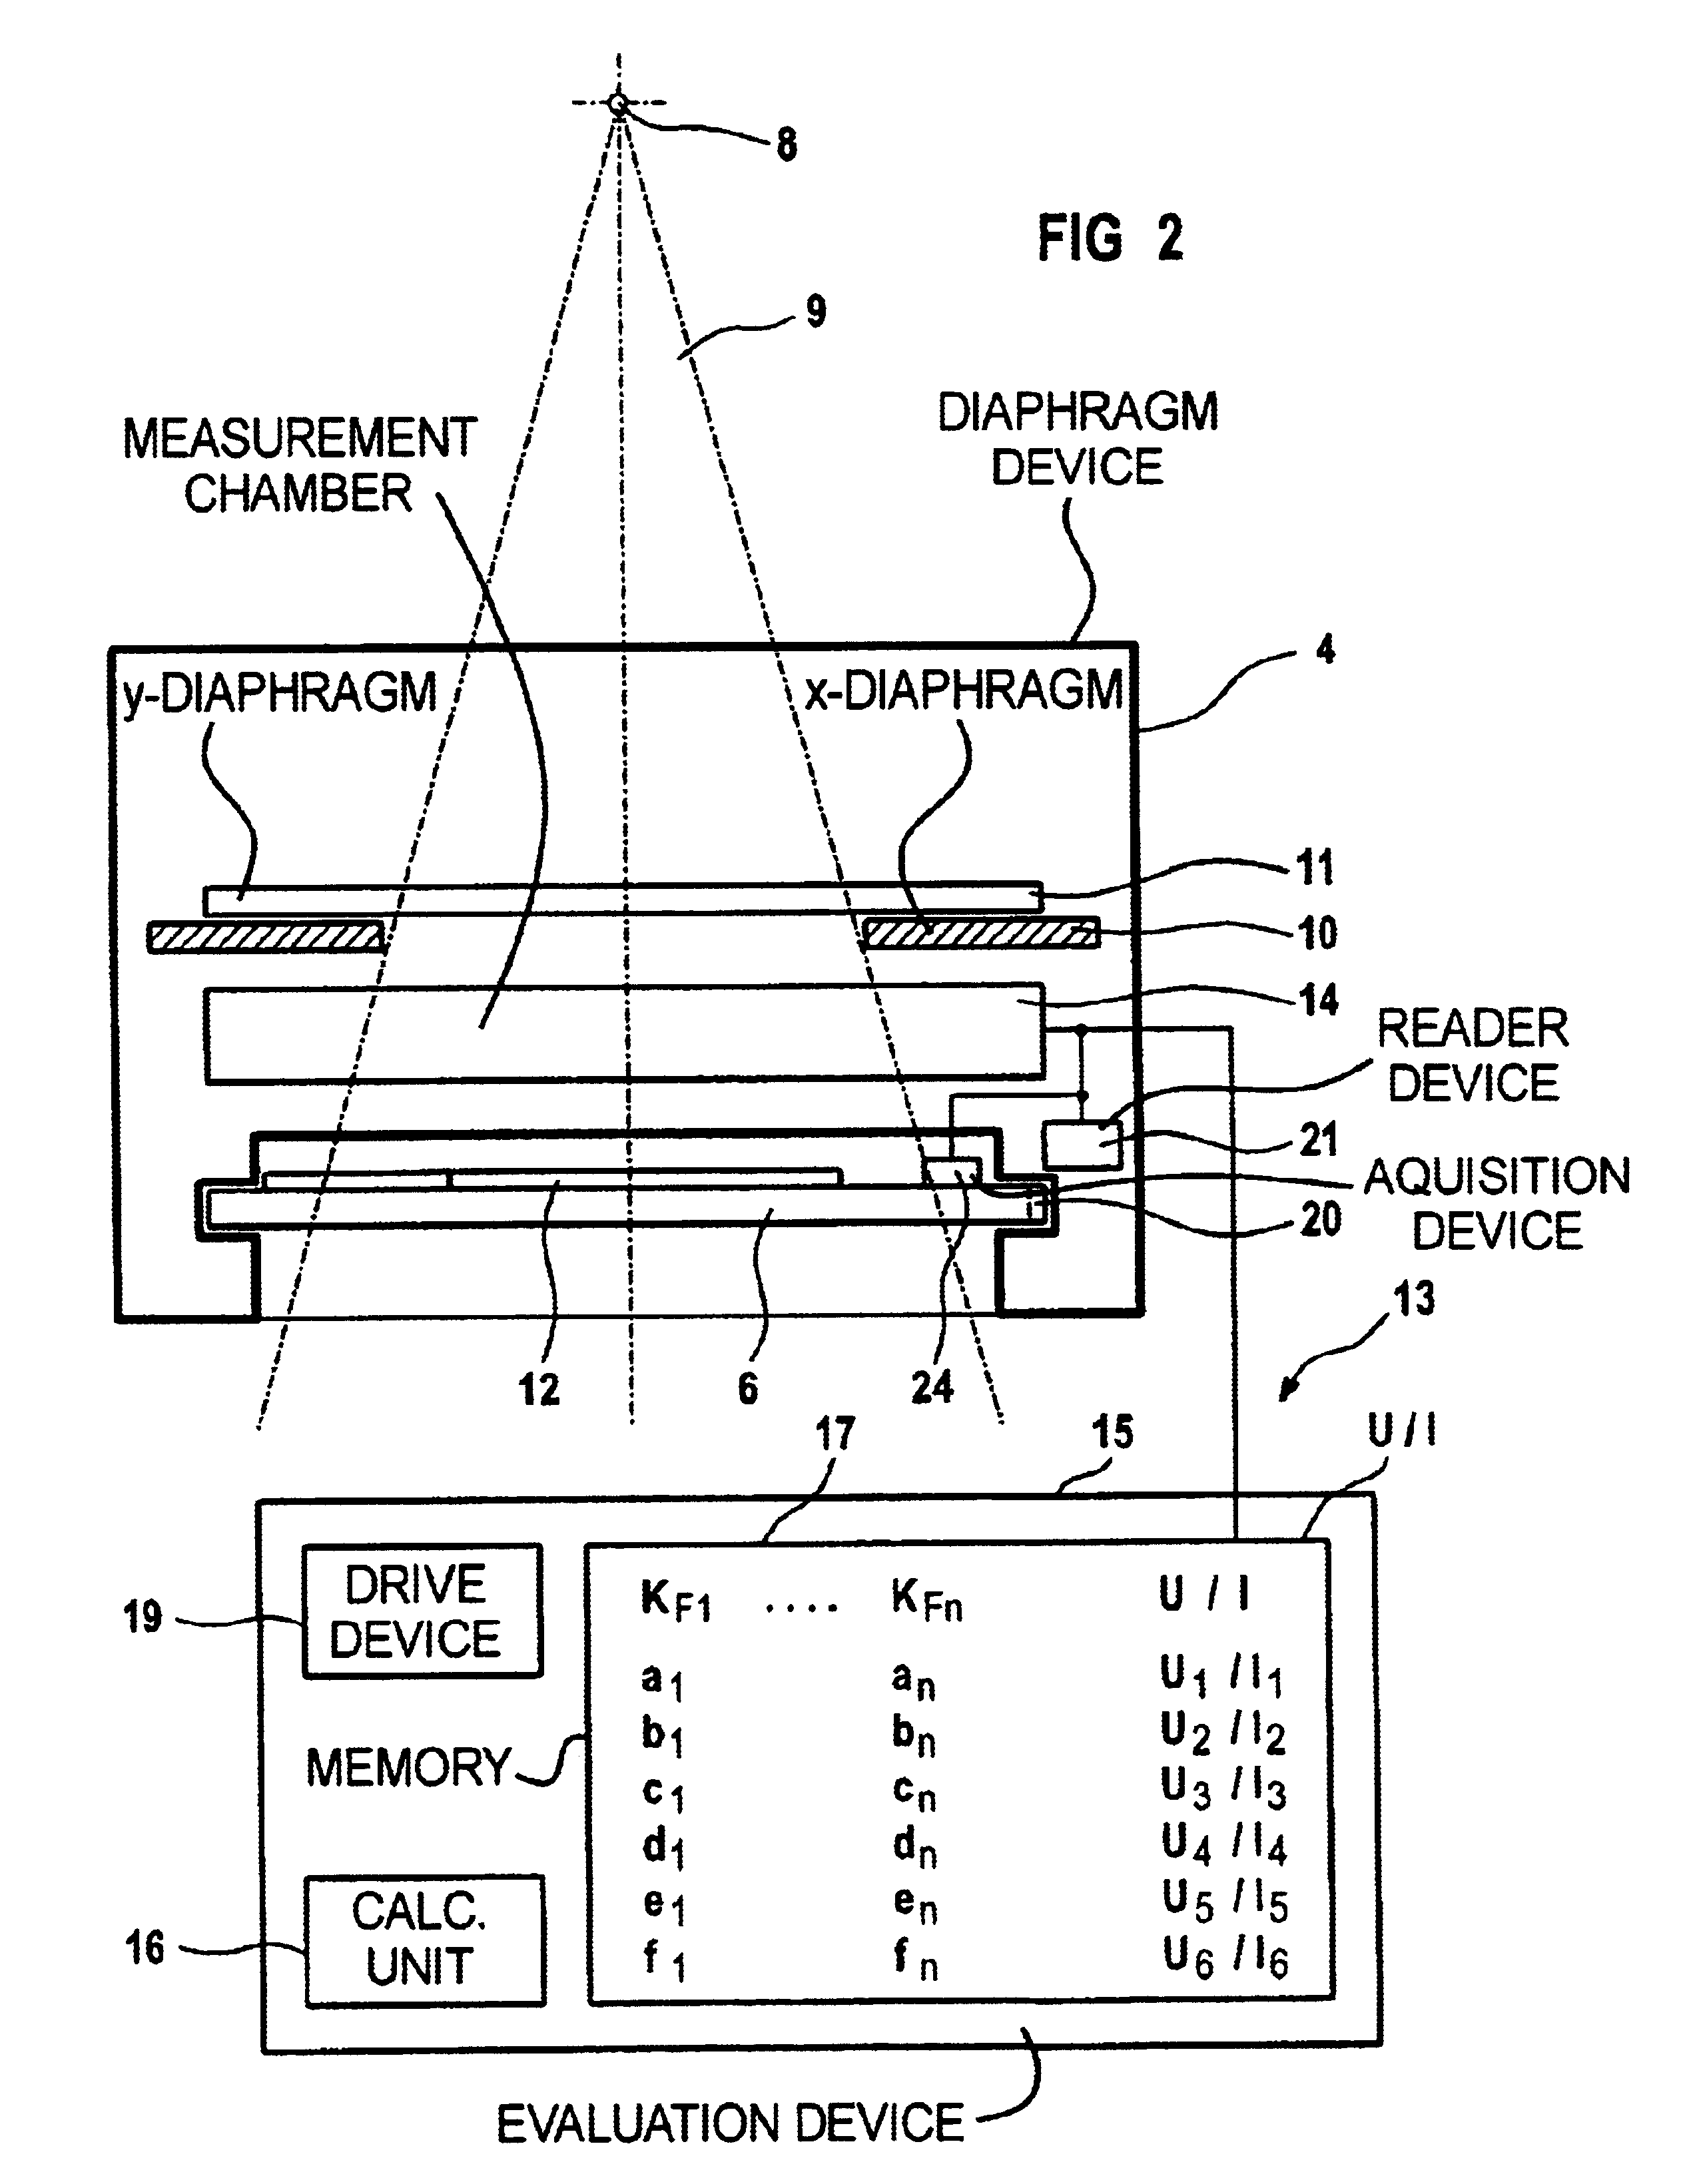 X-ray apparatus with interchangeable filter and area dose measuring device